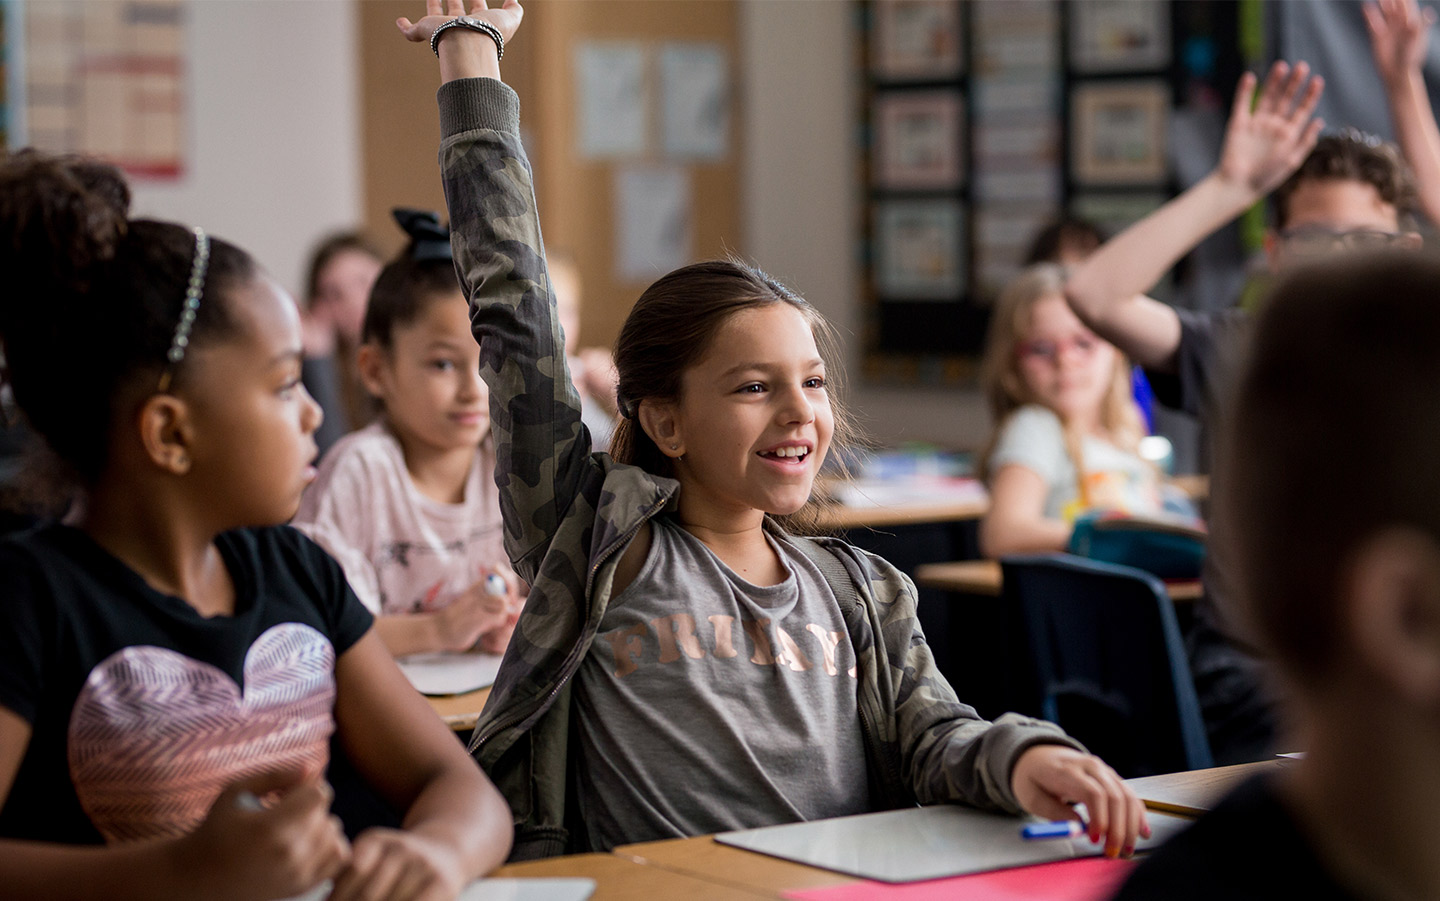 A girl wearing a Cochlear implant raises her hand in the classroom